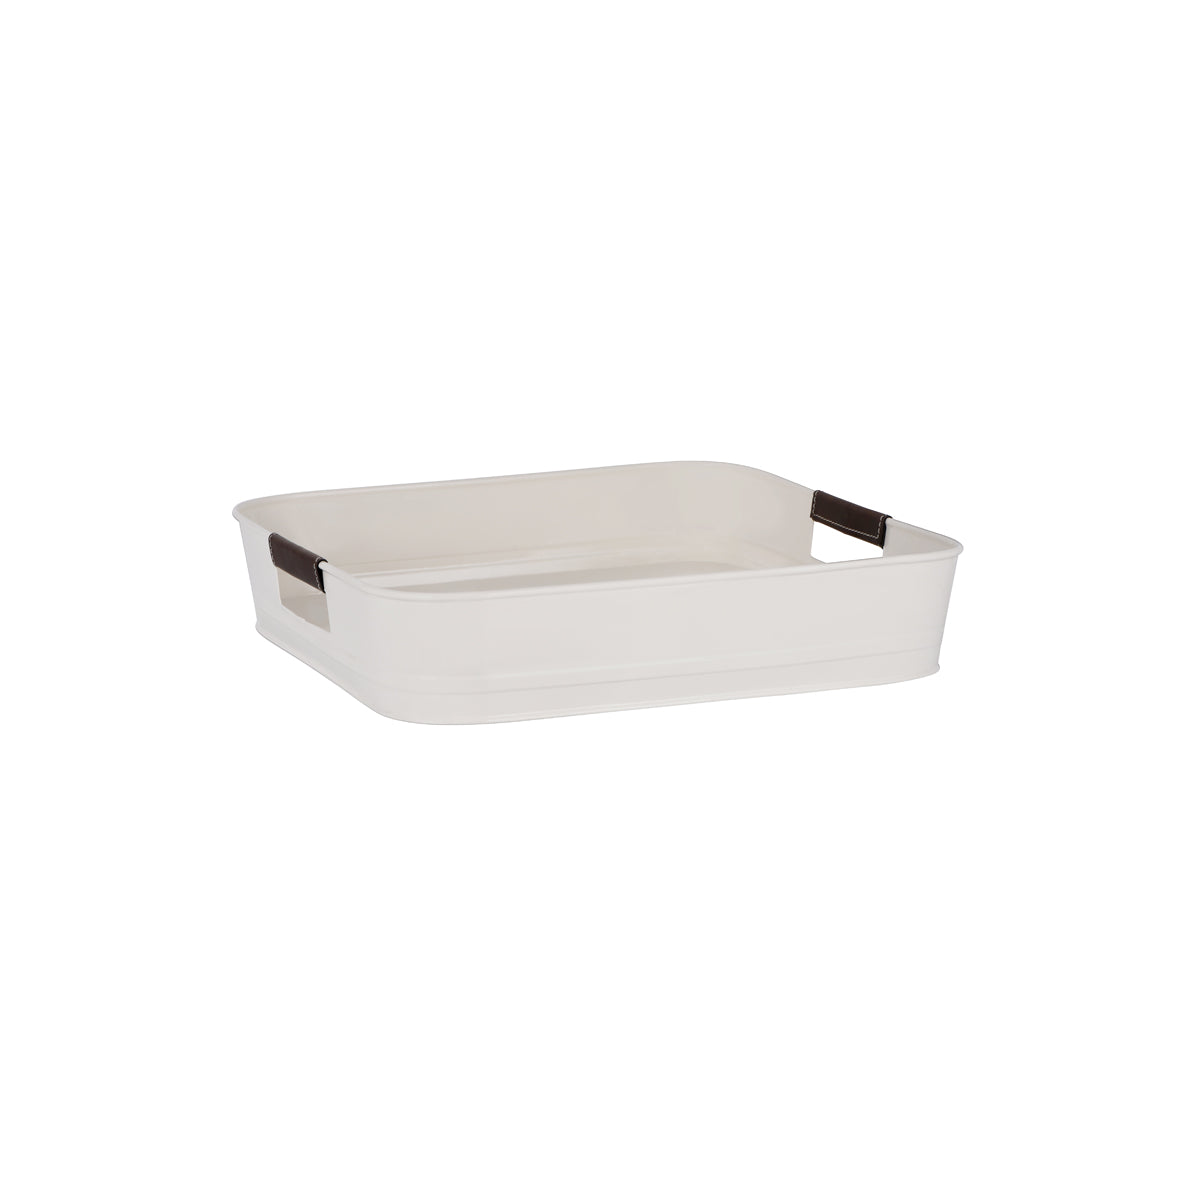 78830 Chef Inox Coney Island Creme Powder Coated Square Tray with Leather Handle 350x75mm Tomkin Australia Hospitality Supplies